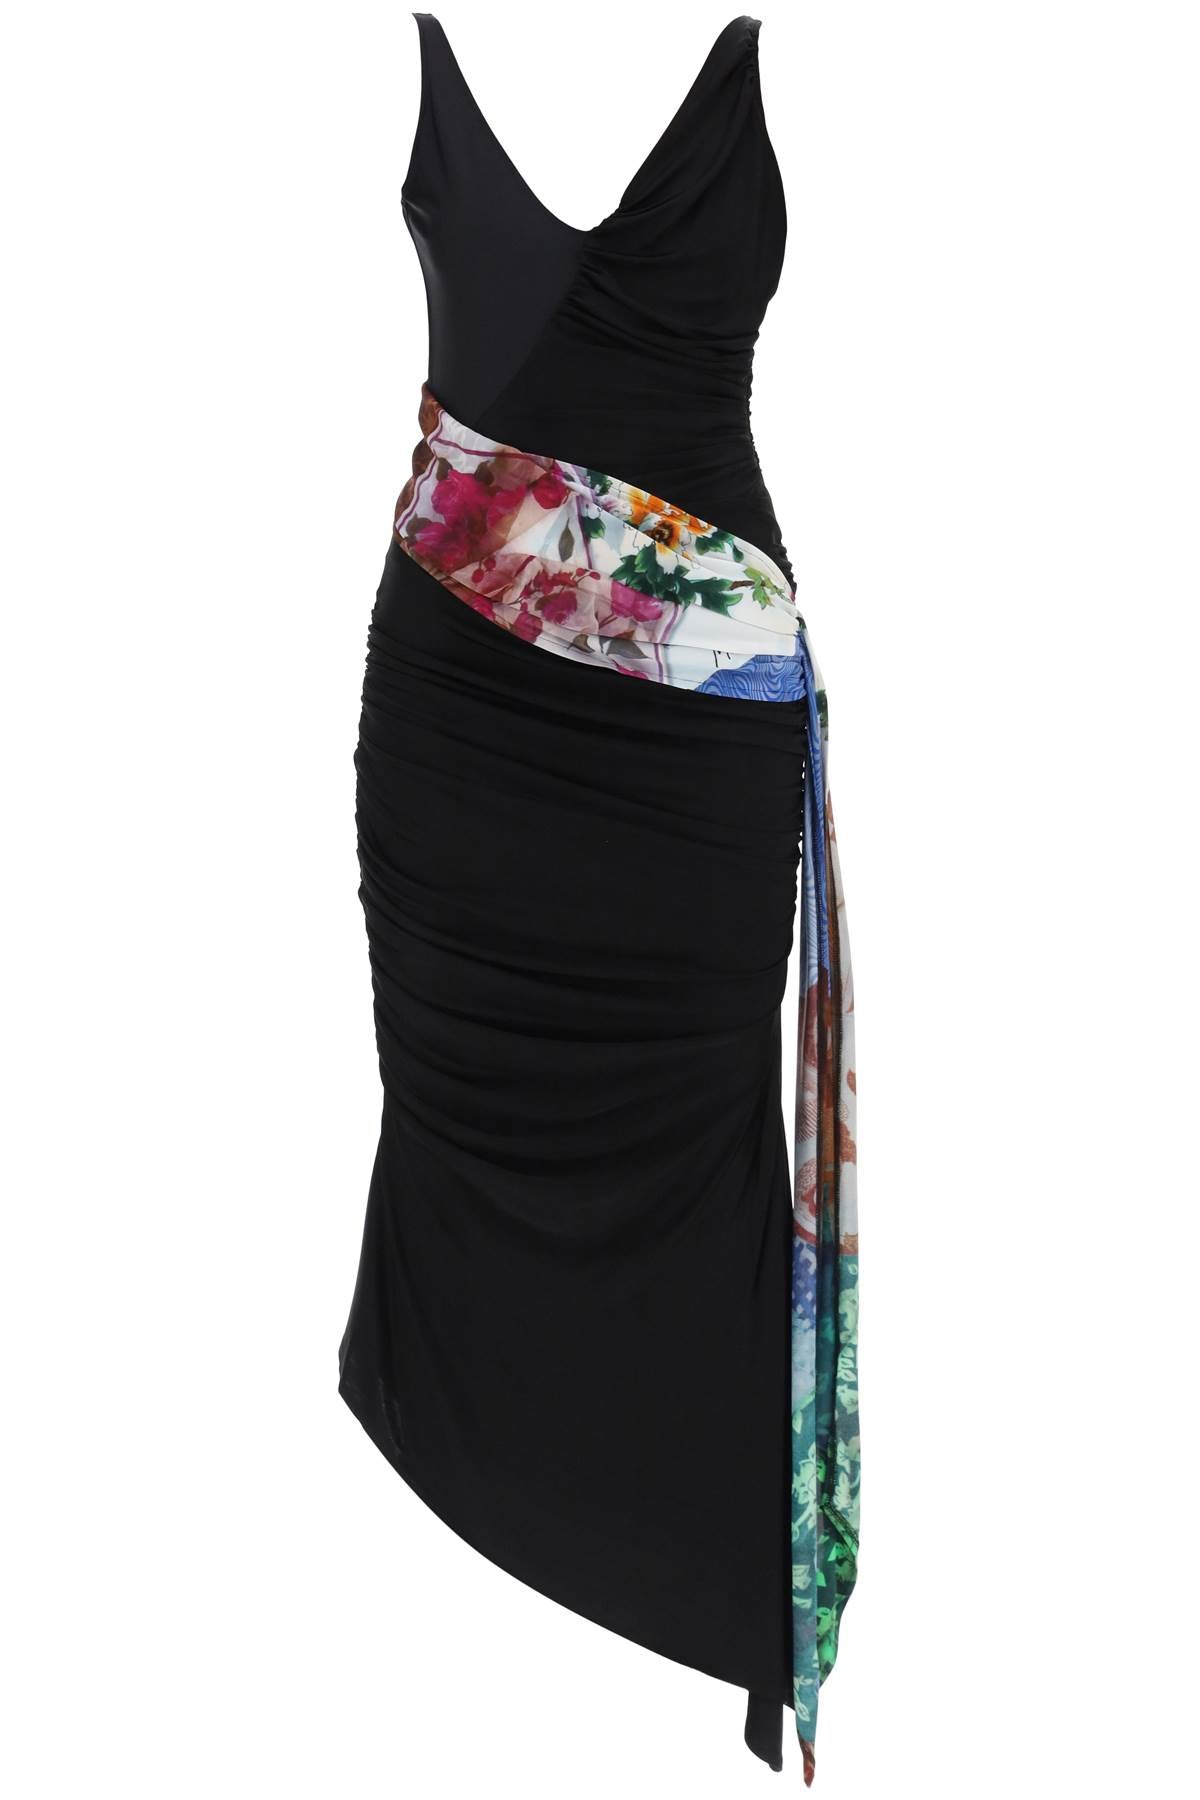 Marine serre dress in draped jersey with contrasting sash-0